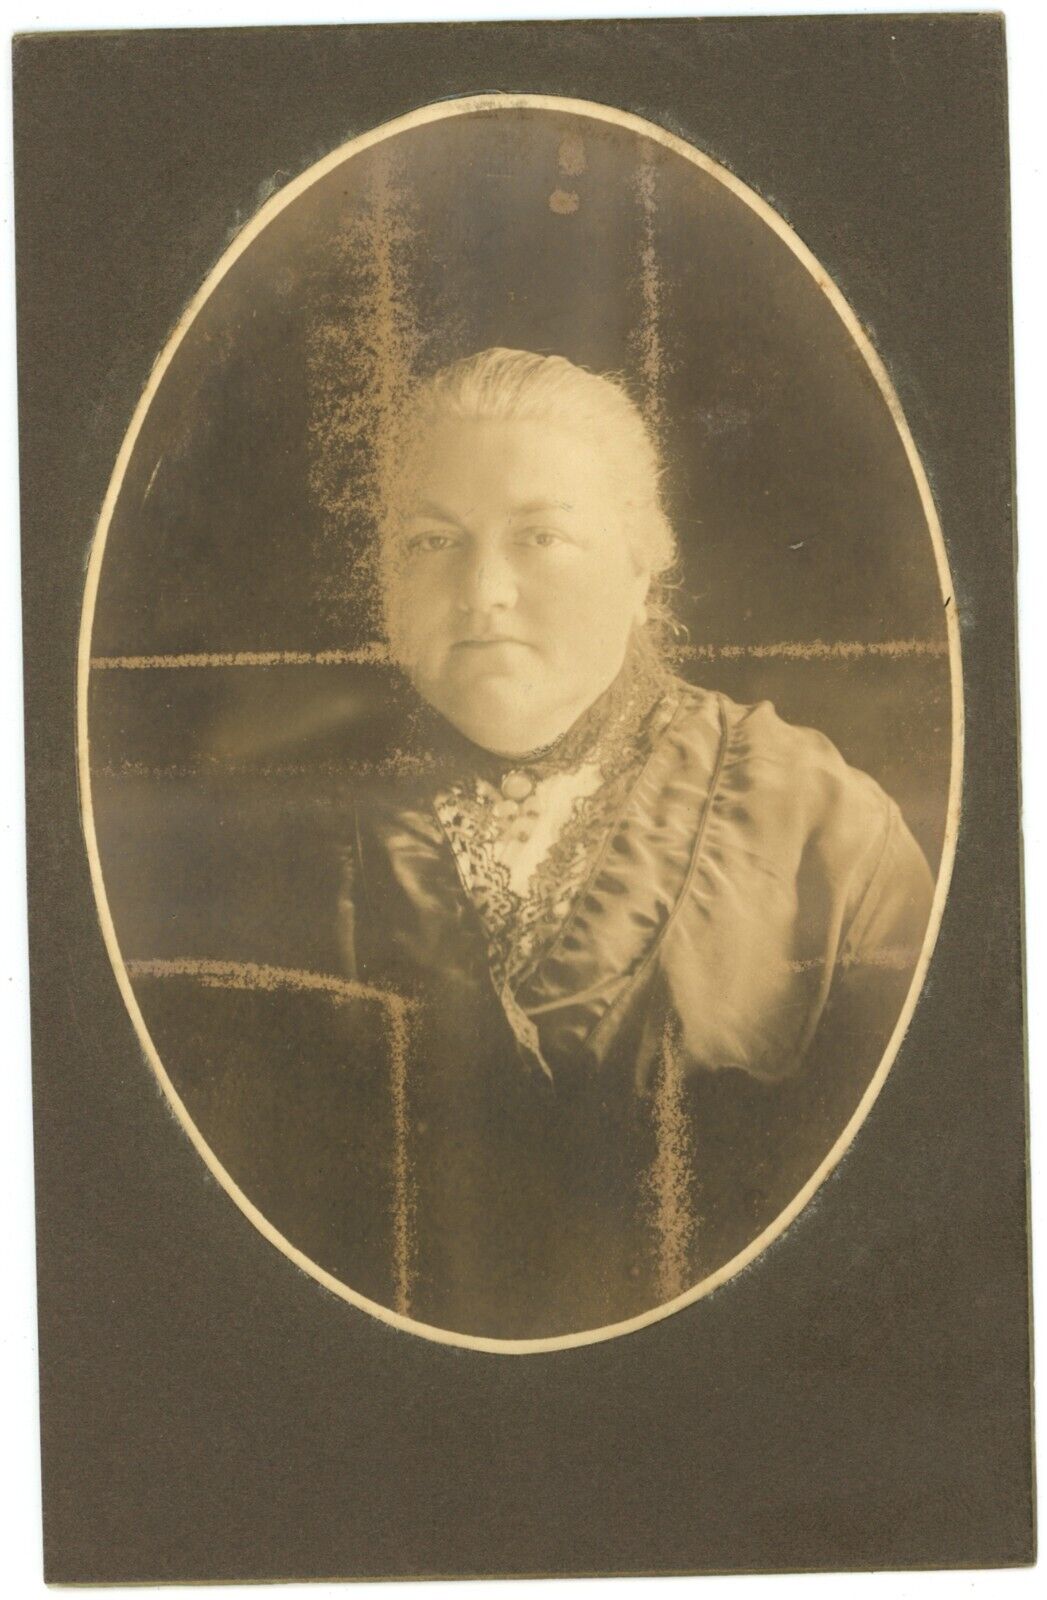 CIRCA 1880'S CABINET CARD Interesting Image of Older Woman With Cross Etched In